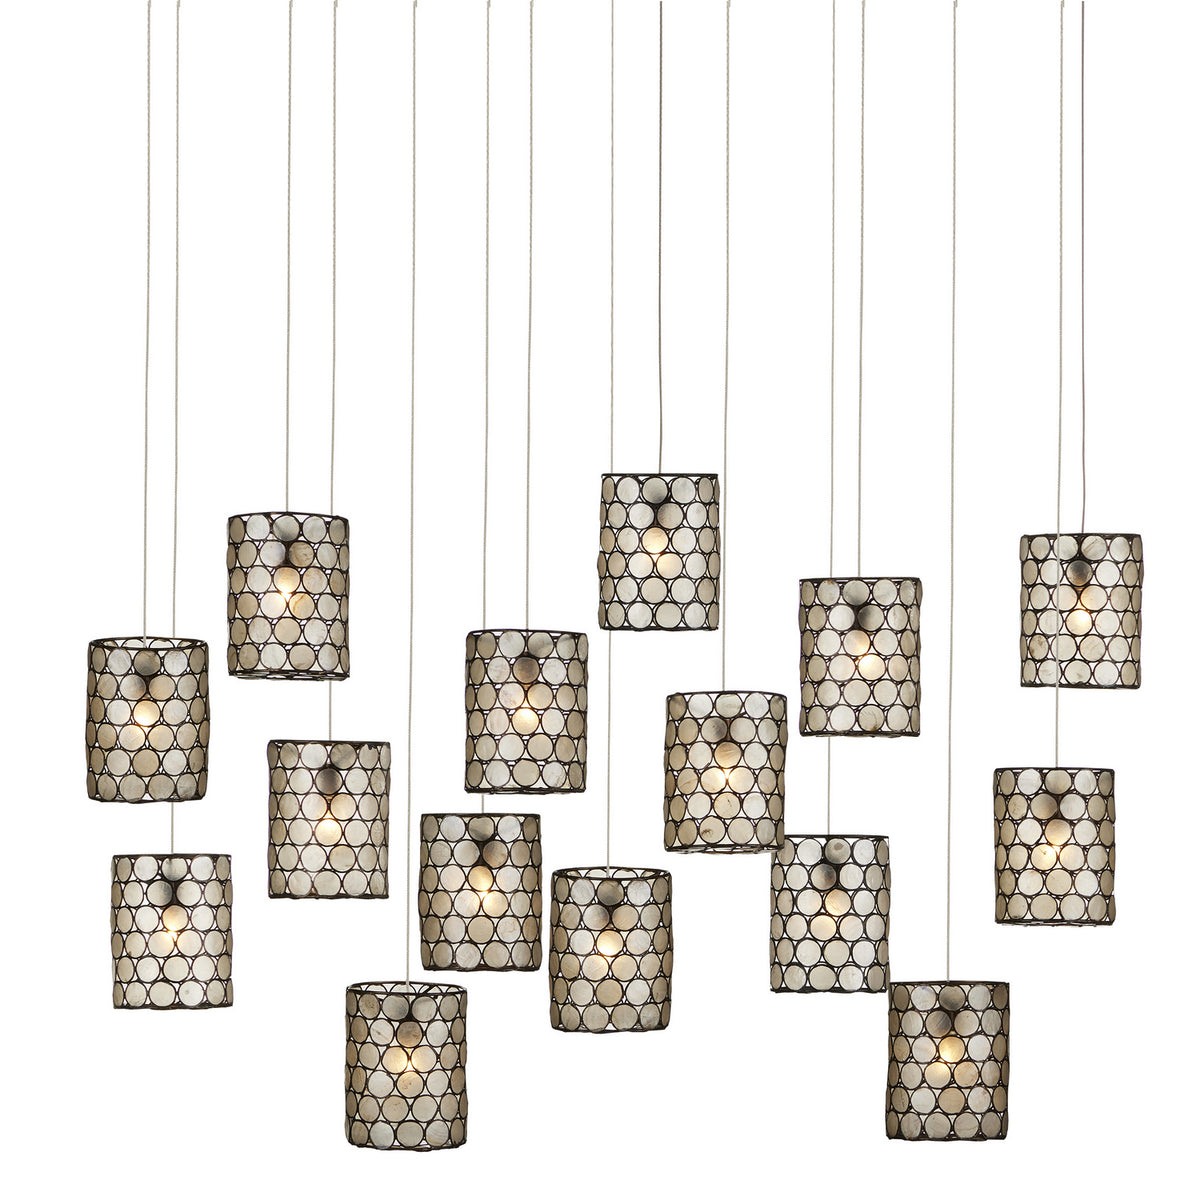 Currey and Company 15 Light Pendant from the Regatta collection in Cupertino finish